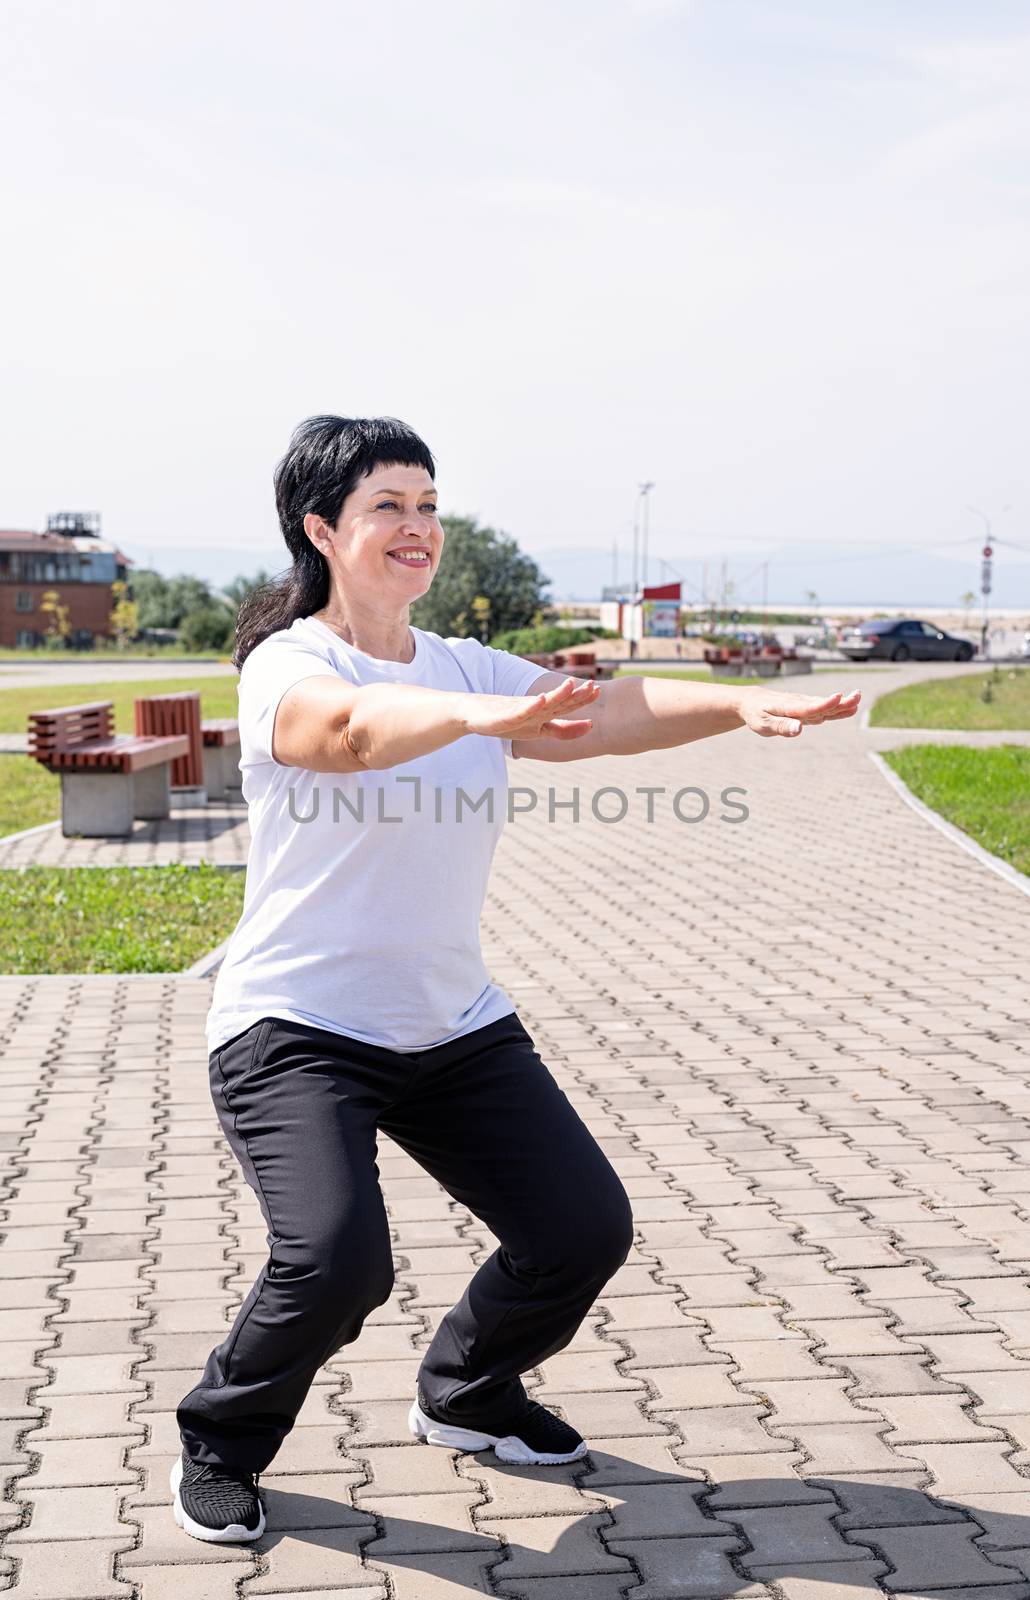 Sport and fitness. Senior sport. Active seniors. Smiling senior woman squatting outdoors in the park